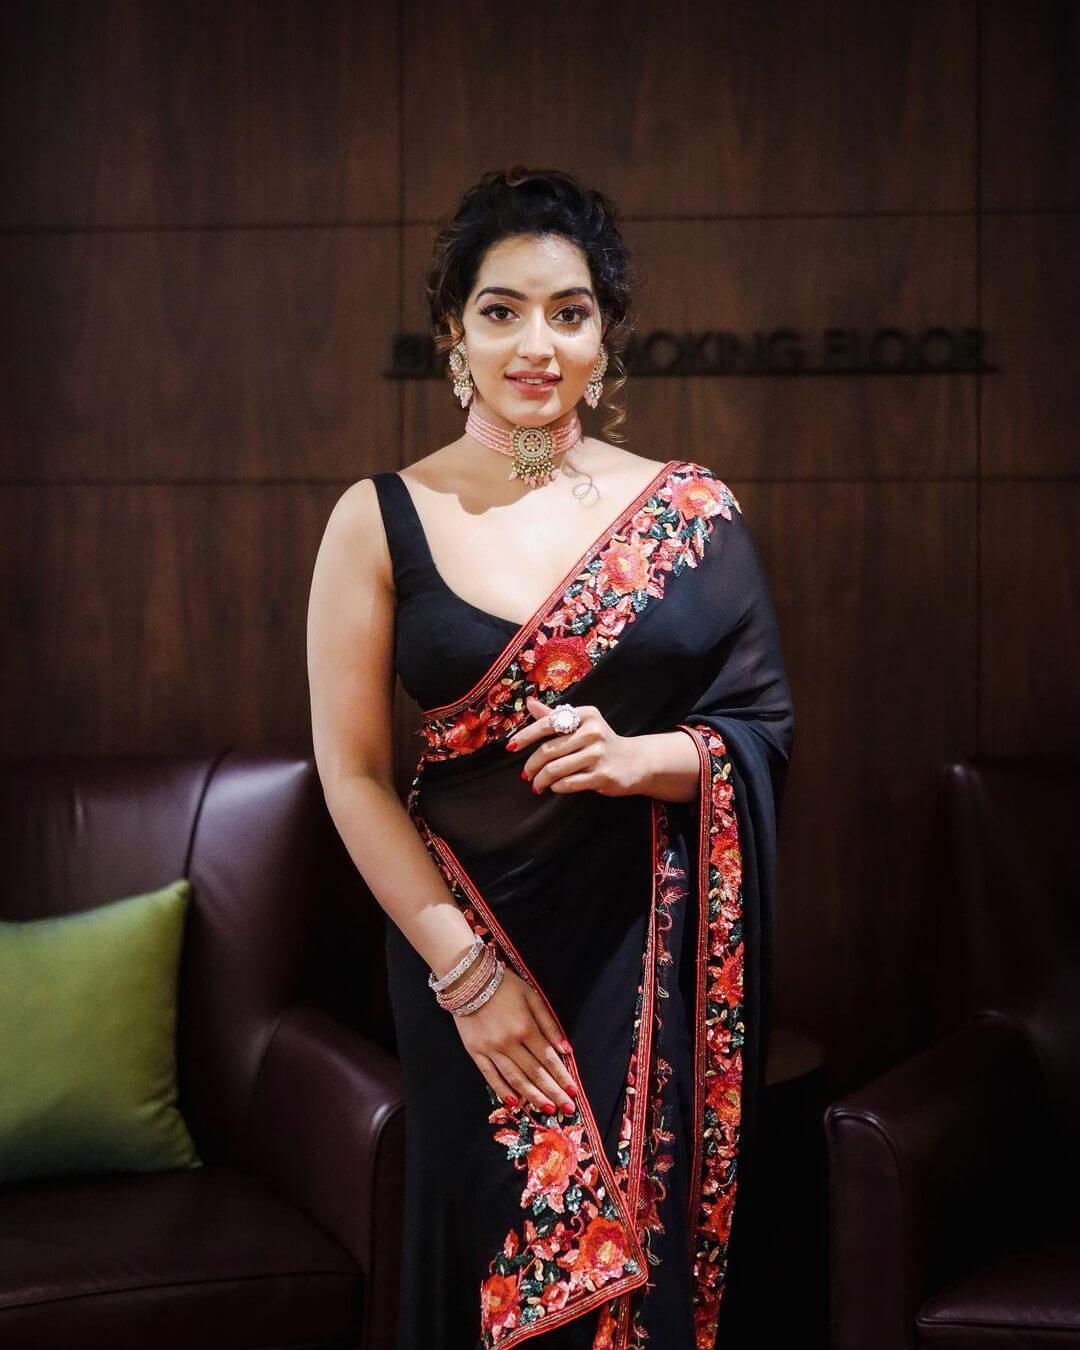 Malavika Menon Looks Drop Dead Gorgeous In Black Floral Embroidered Saree With Sleeveless Blouse